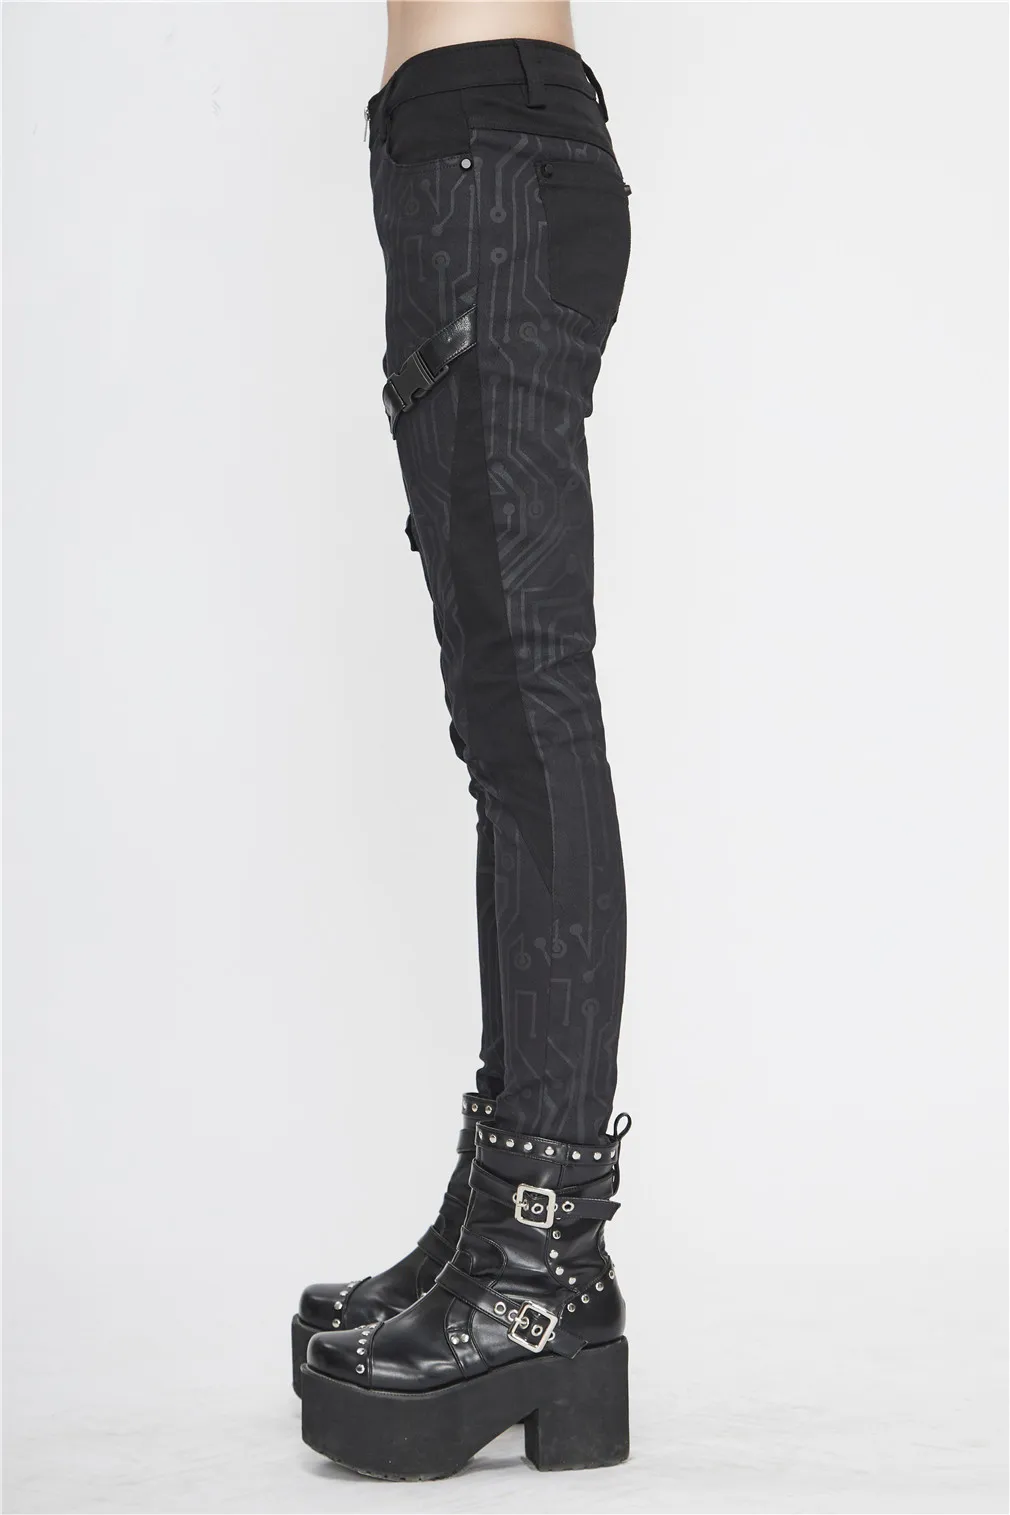 Printed trousers, Gothic ladies trousers, tight-fitting left and right thighs, button-up style, handsome feet pants